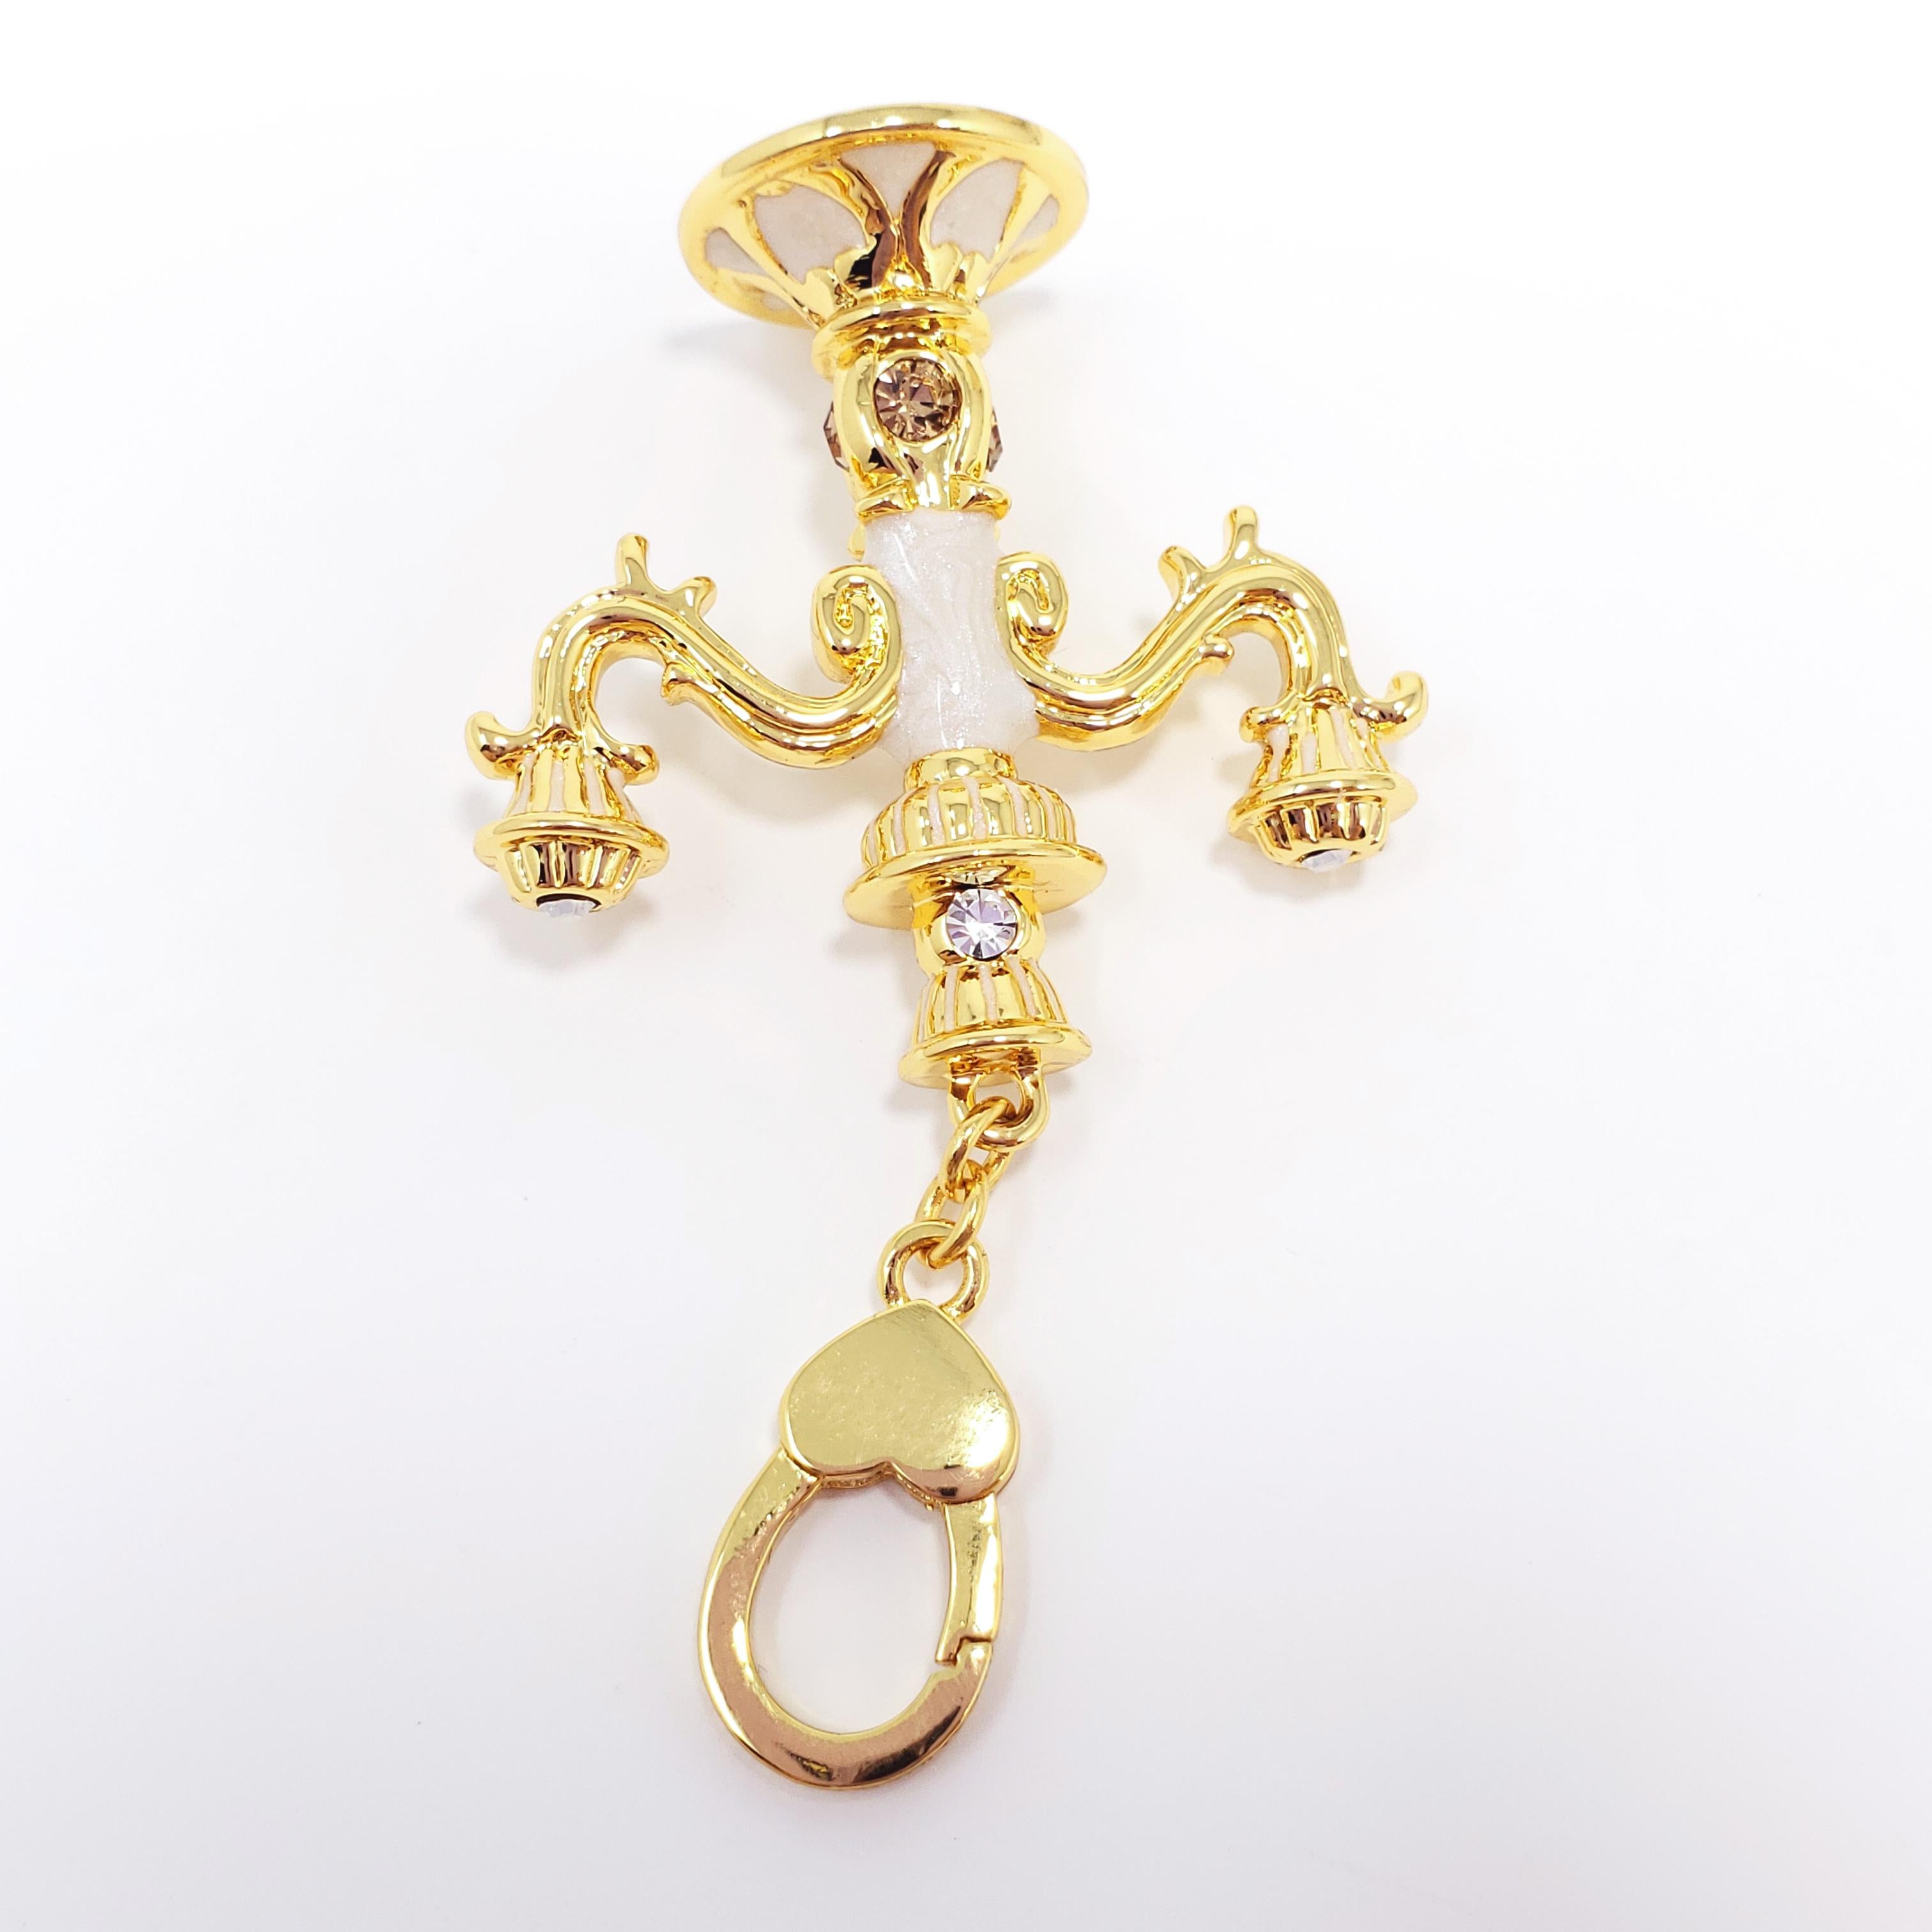 Women's or Men's Jay Strongwater Candlestick Charm in Gold, with Enamel and Crystals